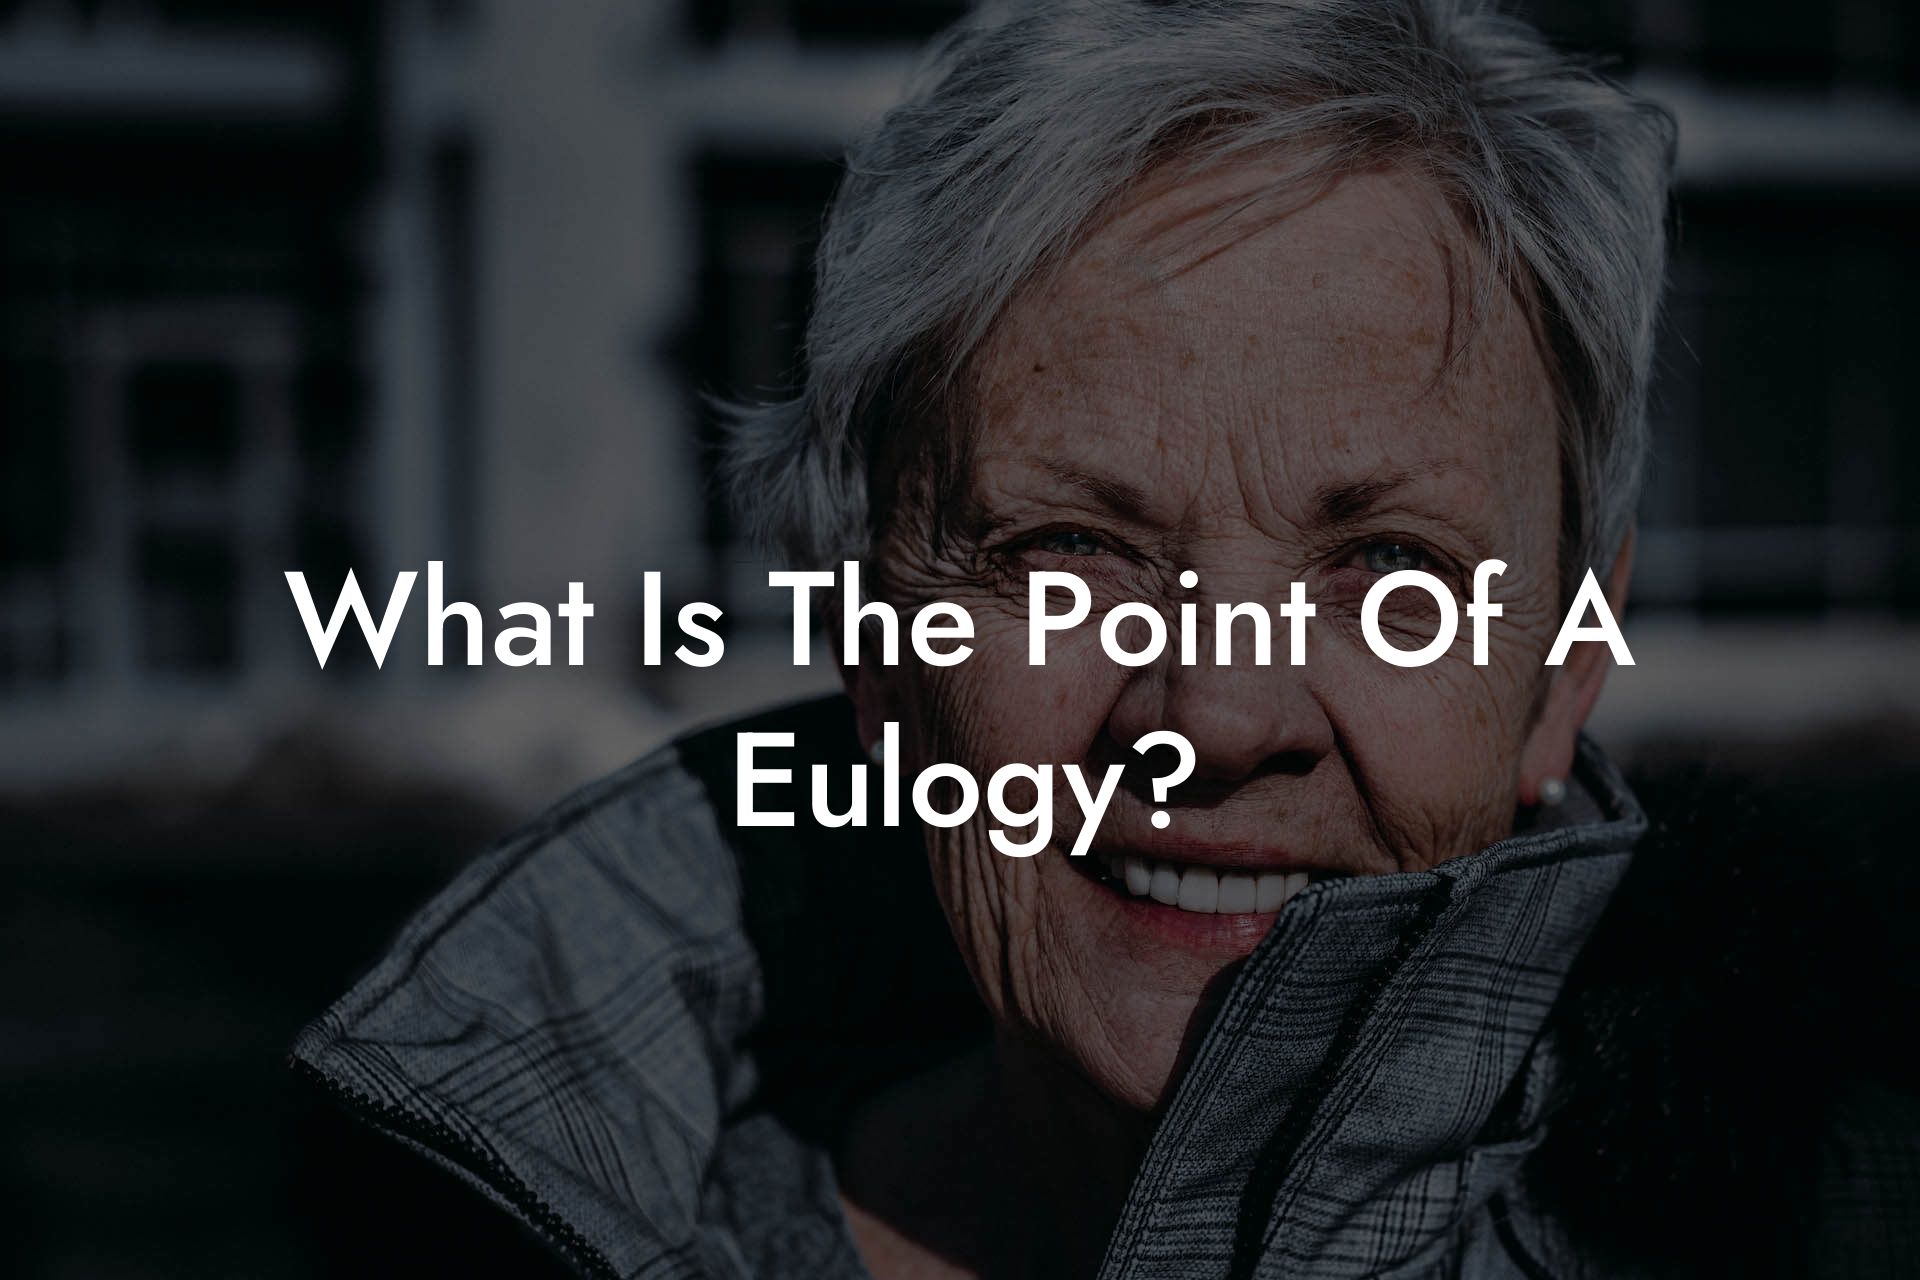 What Is The Point Of A Eulogy?